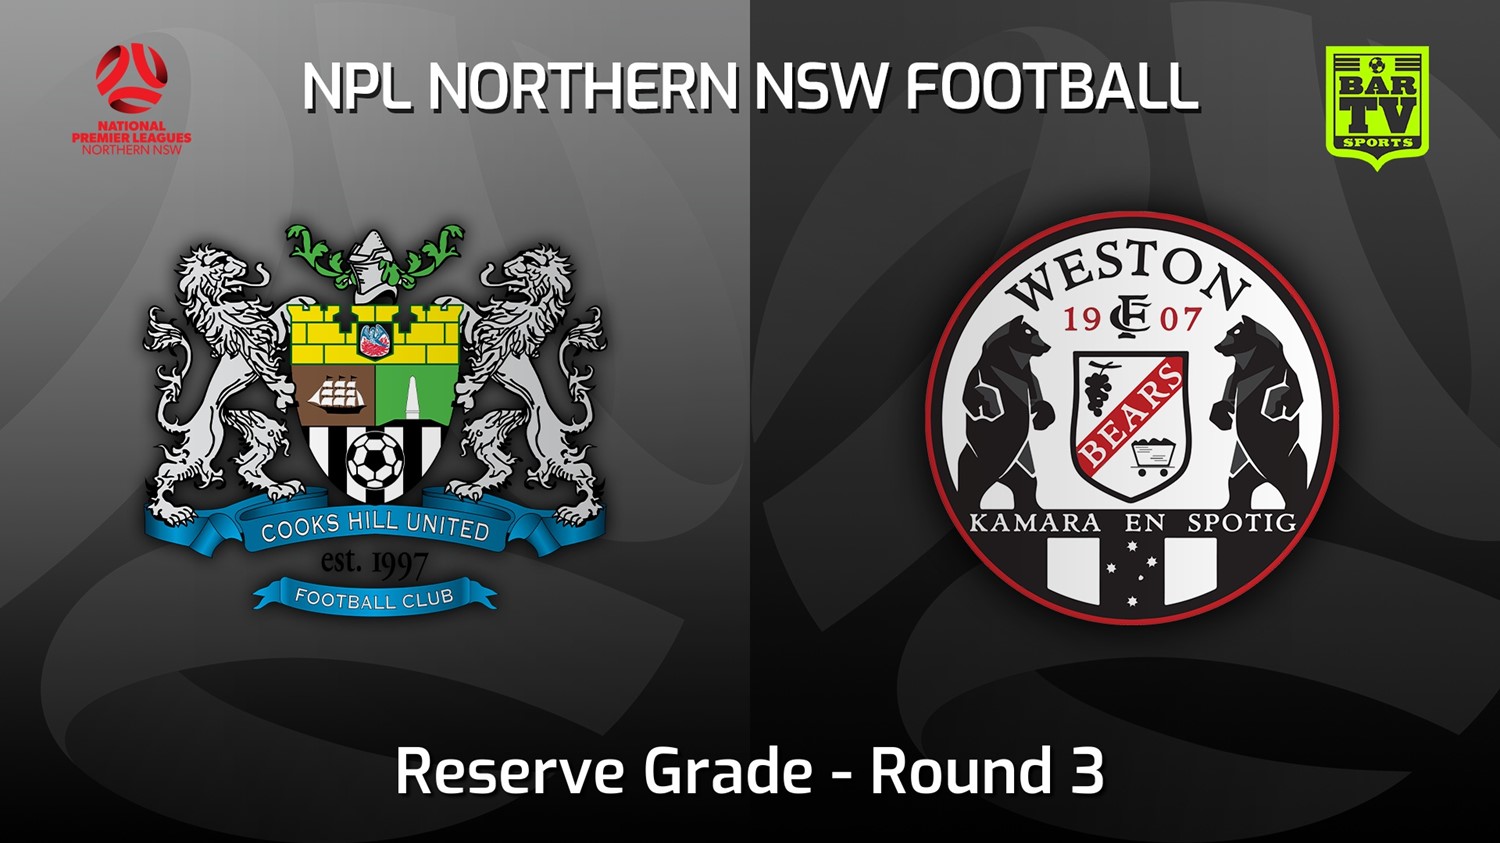 220319-NNSW NPL Res Round 3 - Cooks Hill United FC (Res) v Weston Workers FC Res Minigame Slate Image